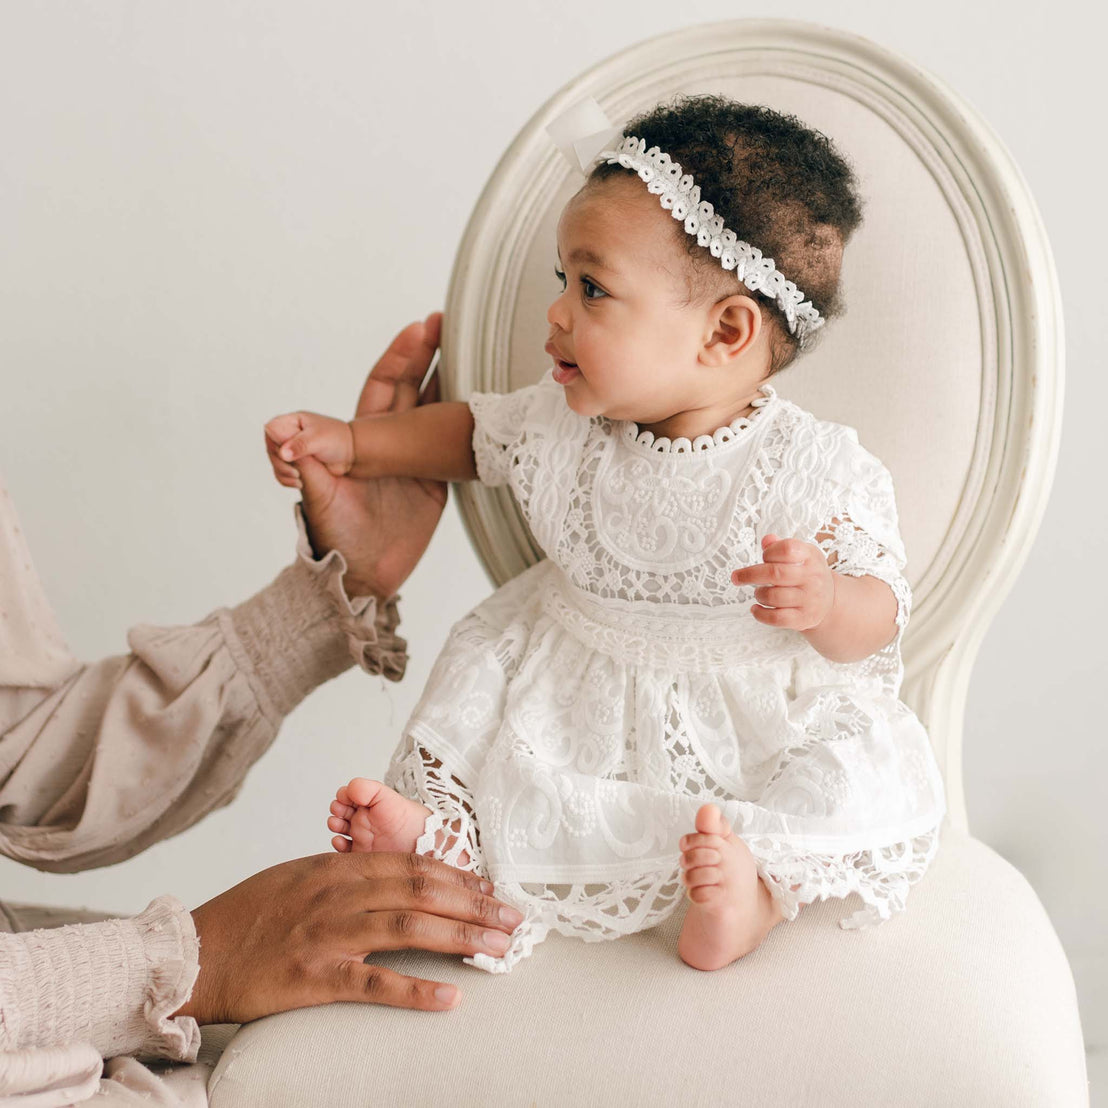 A baby wearing the Adeline Lace Dress & Bloomers with a matching headband sits on a beige chair. The child looks to the side while reaching out with one hand, supported partially by an adult from the side. The background is plain and light-colored.